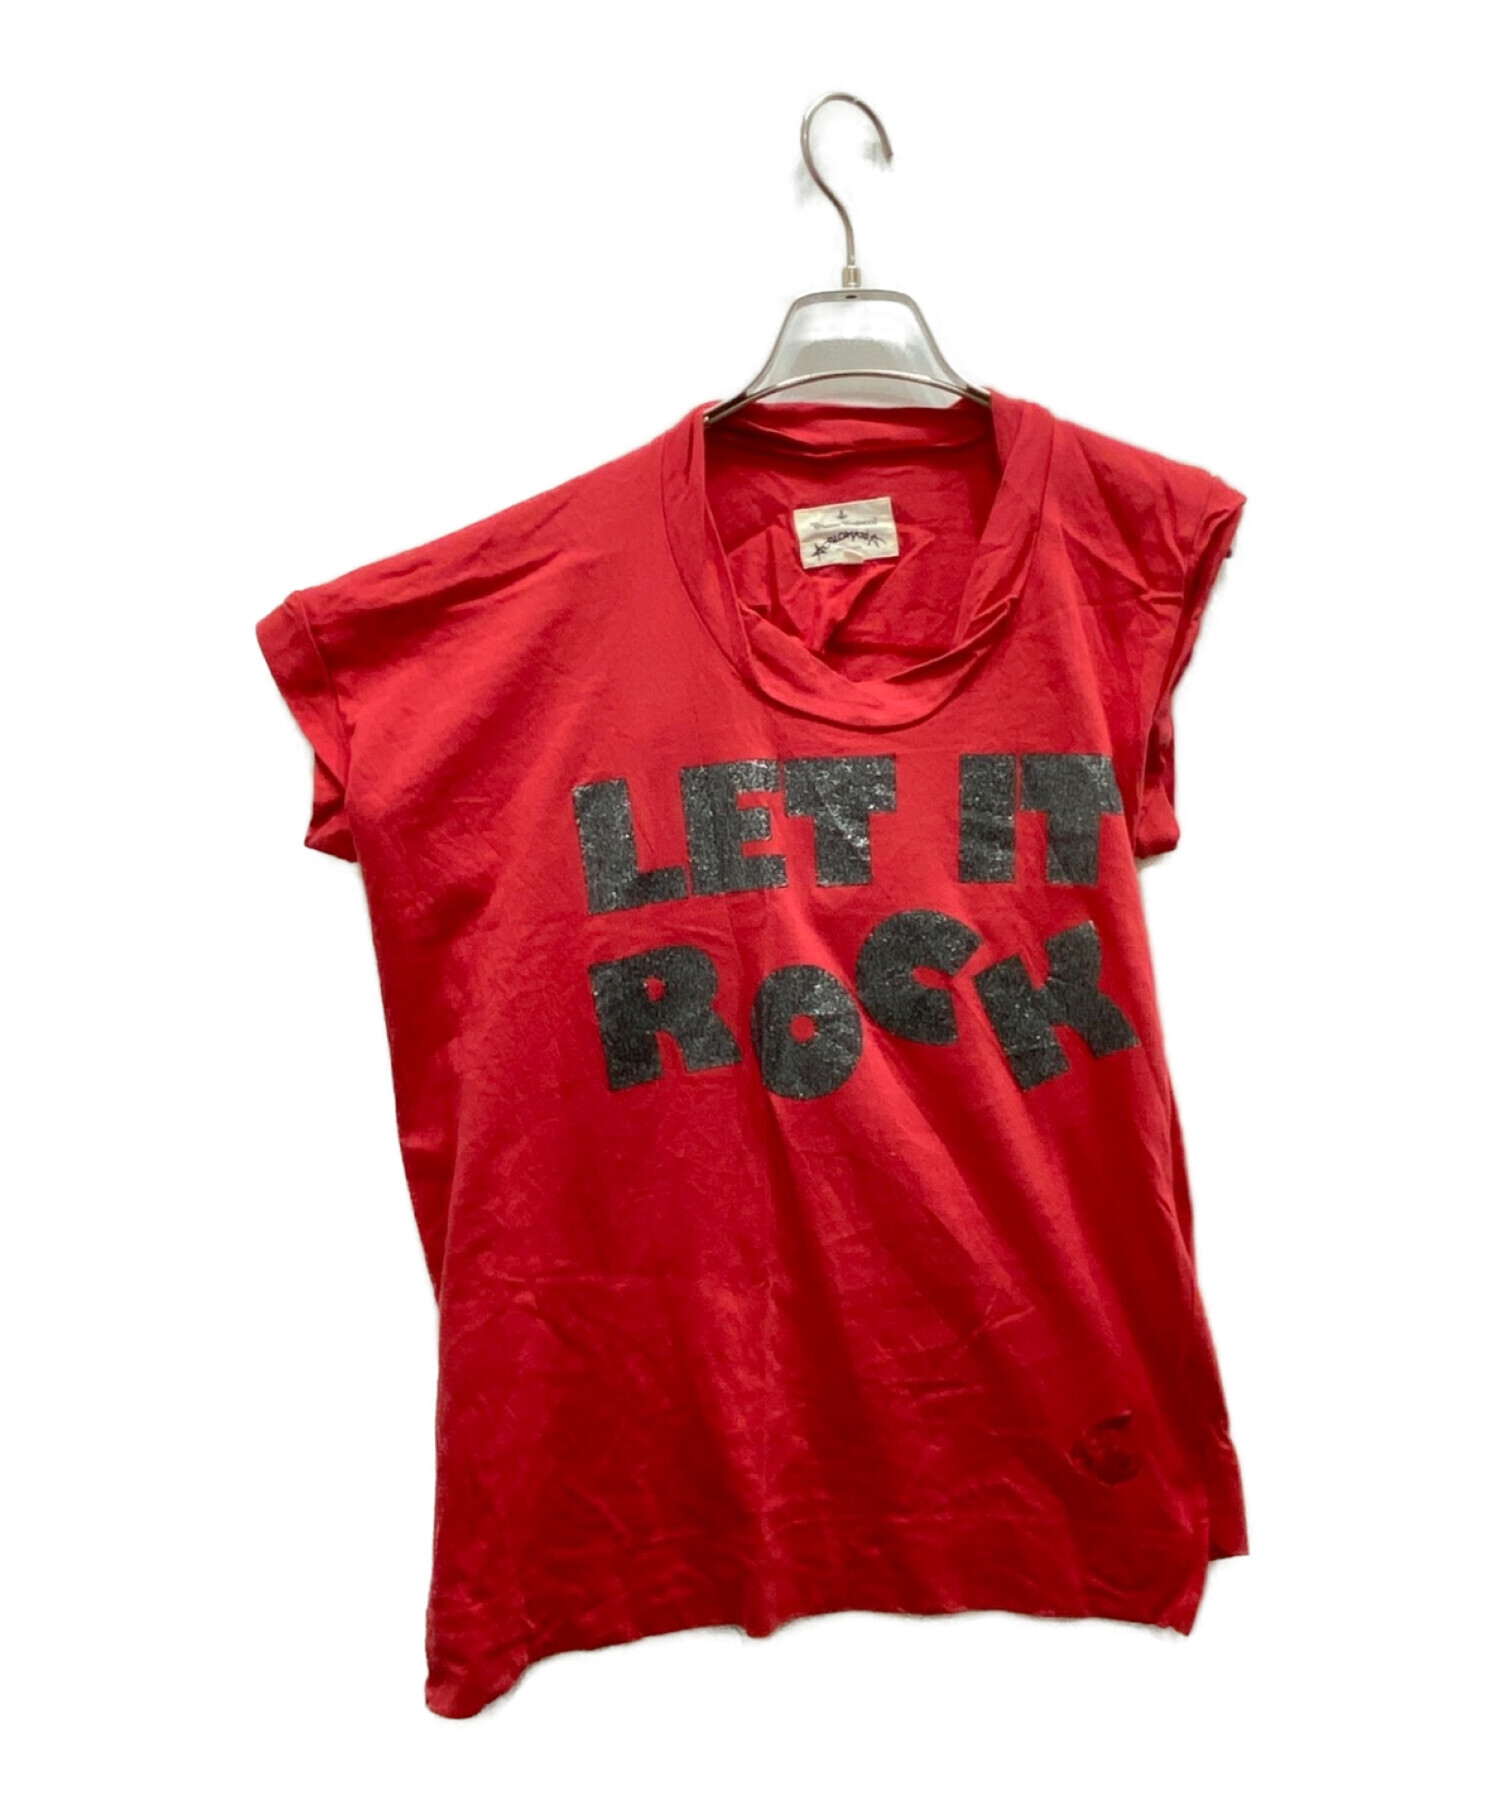 Vivienne Westwood ANGLOMANIA (ヴィヴィアンウエストウッド アングロマニア) LET IT ROCKプリントTシャツ  レッド サイズ:38